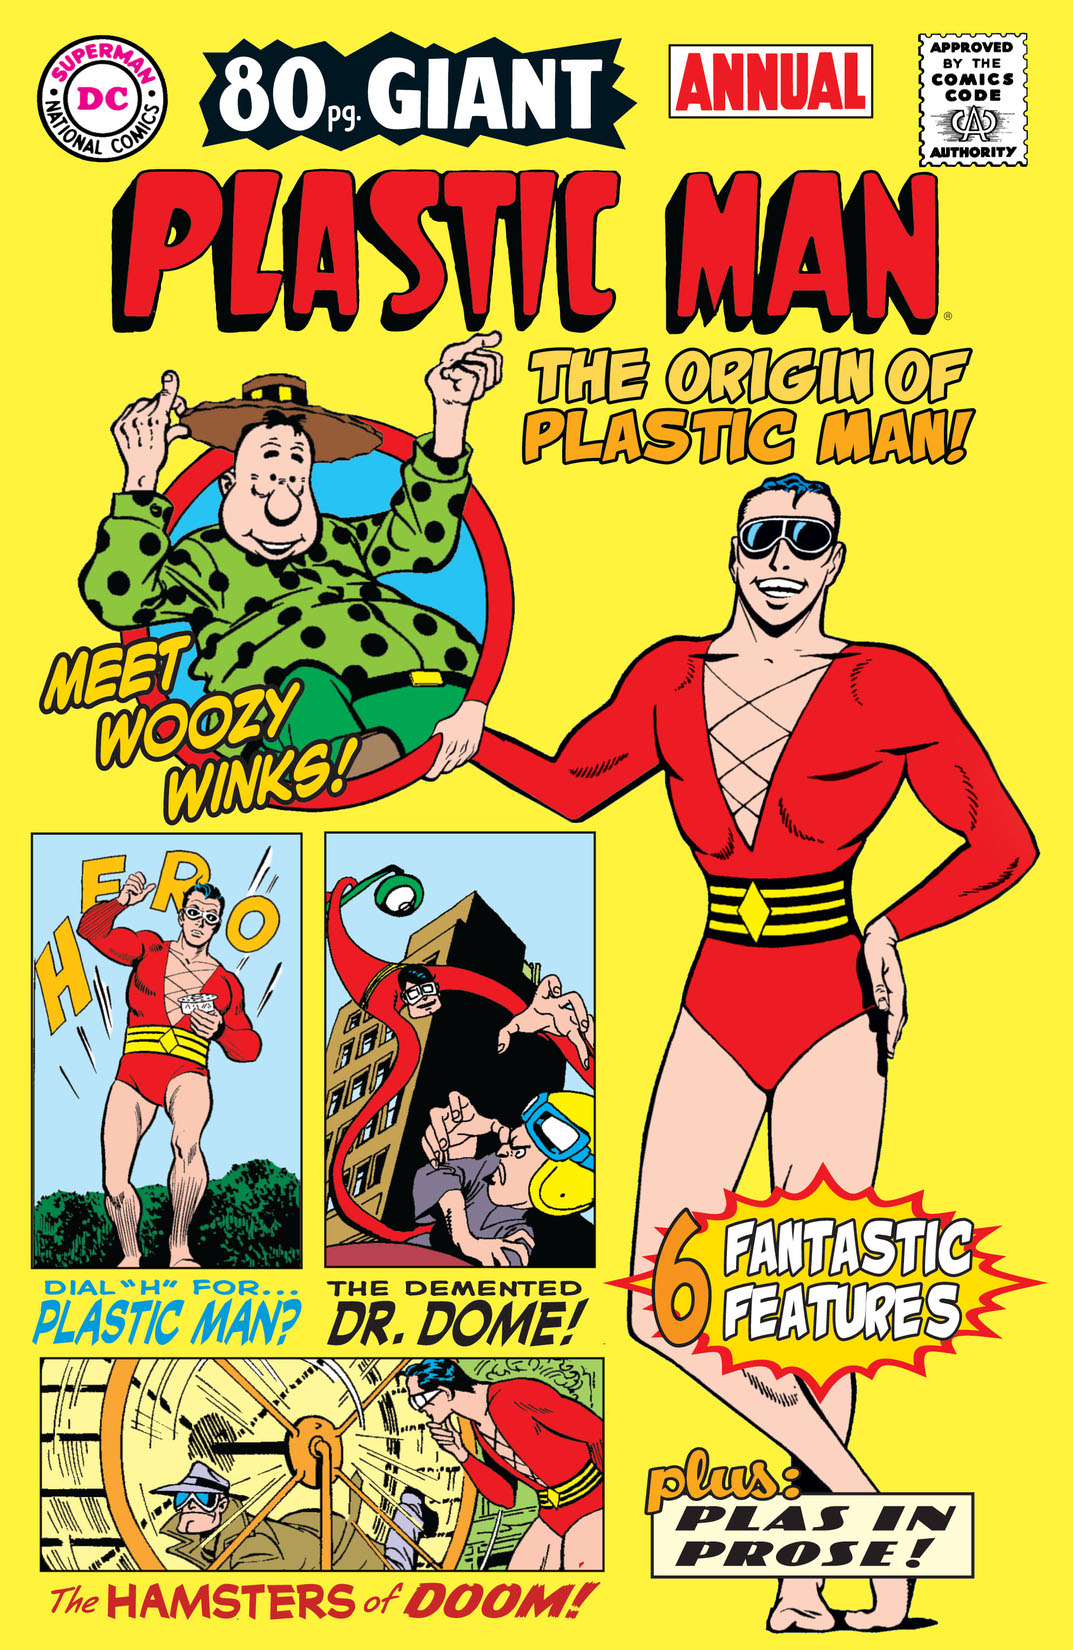 Plastic Man 80-Page Giant (2003-) #1 preview images